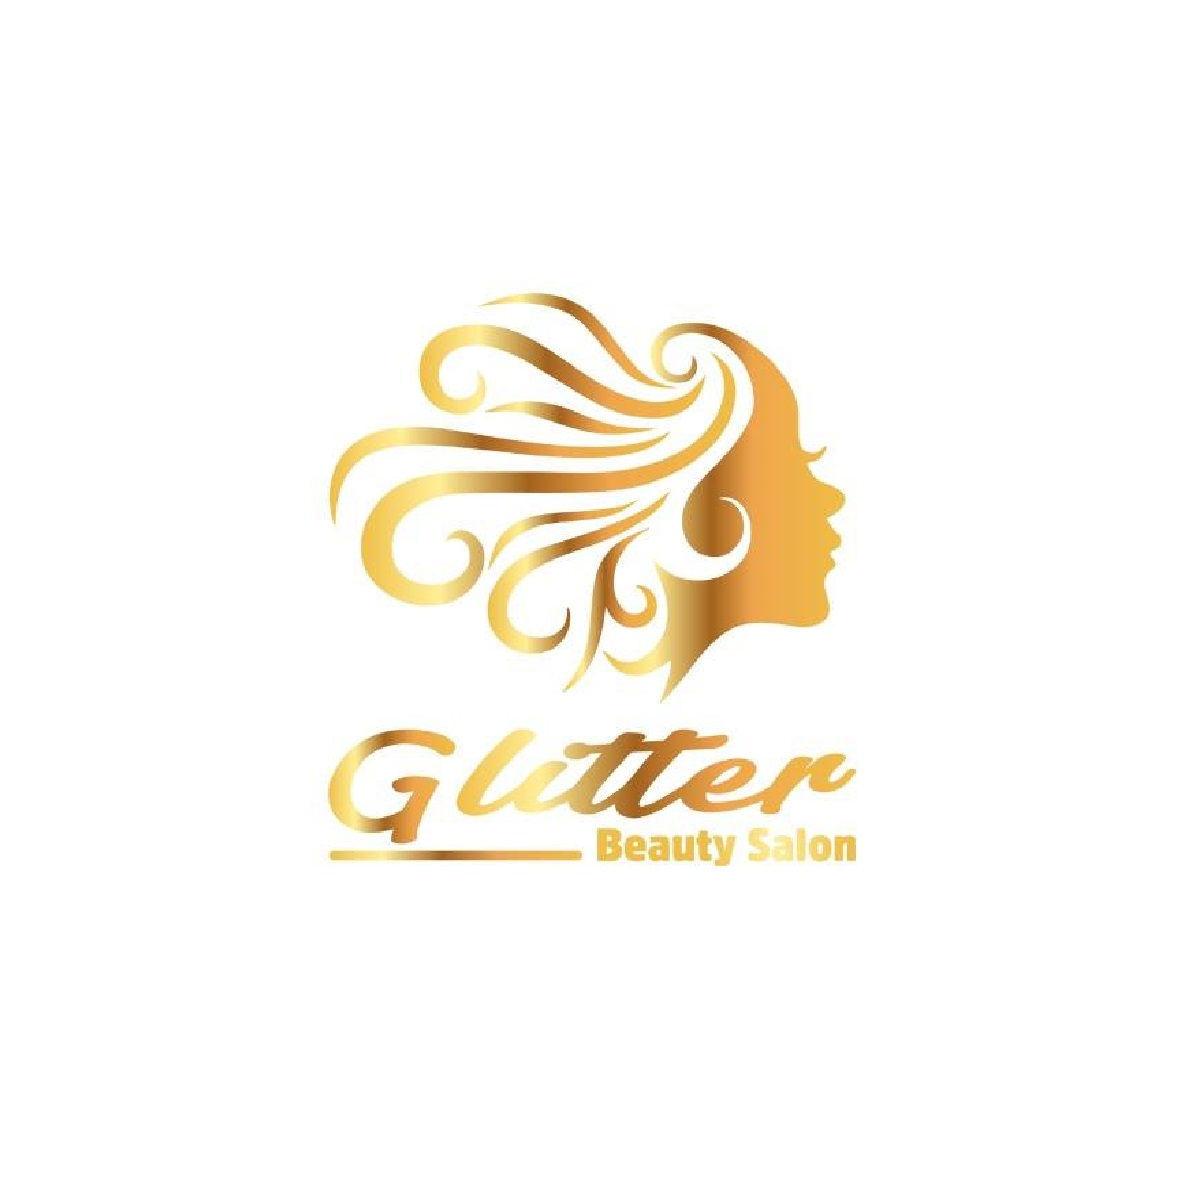 Jobs and opportunities at Glitter Salon | Jobiano